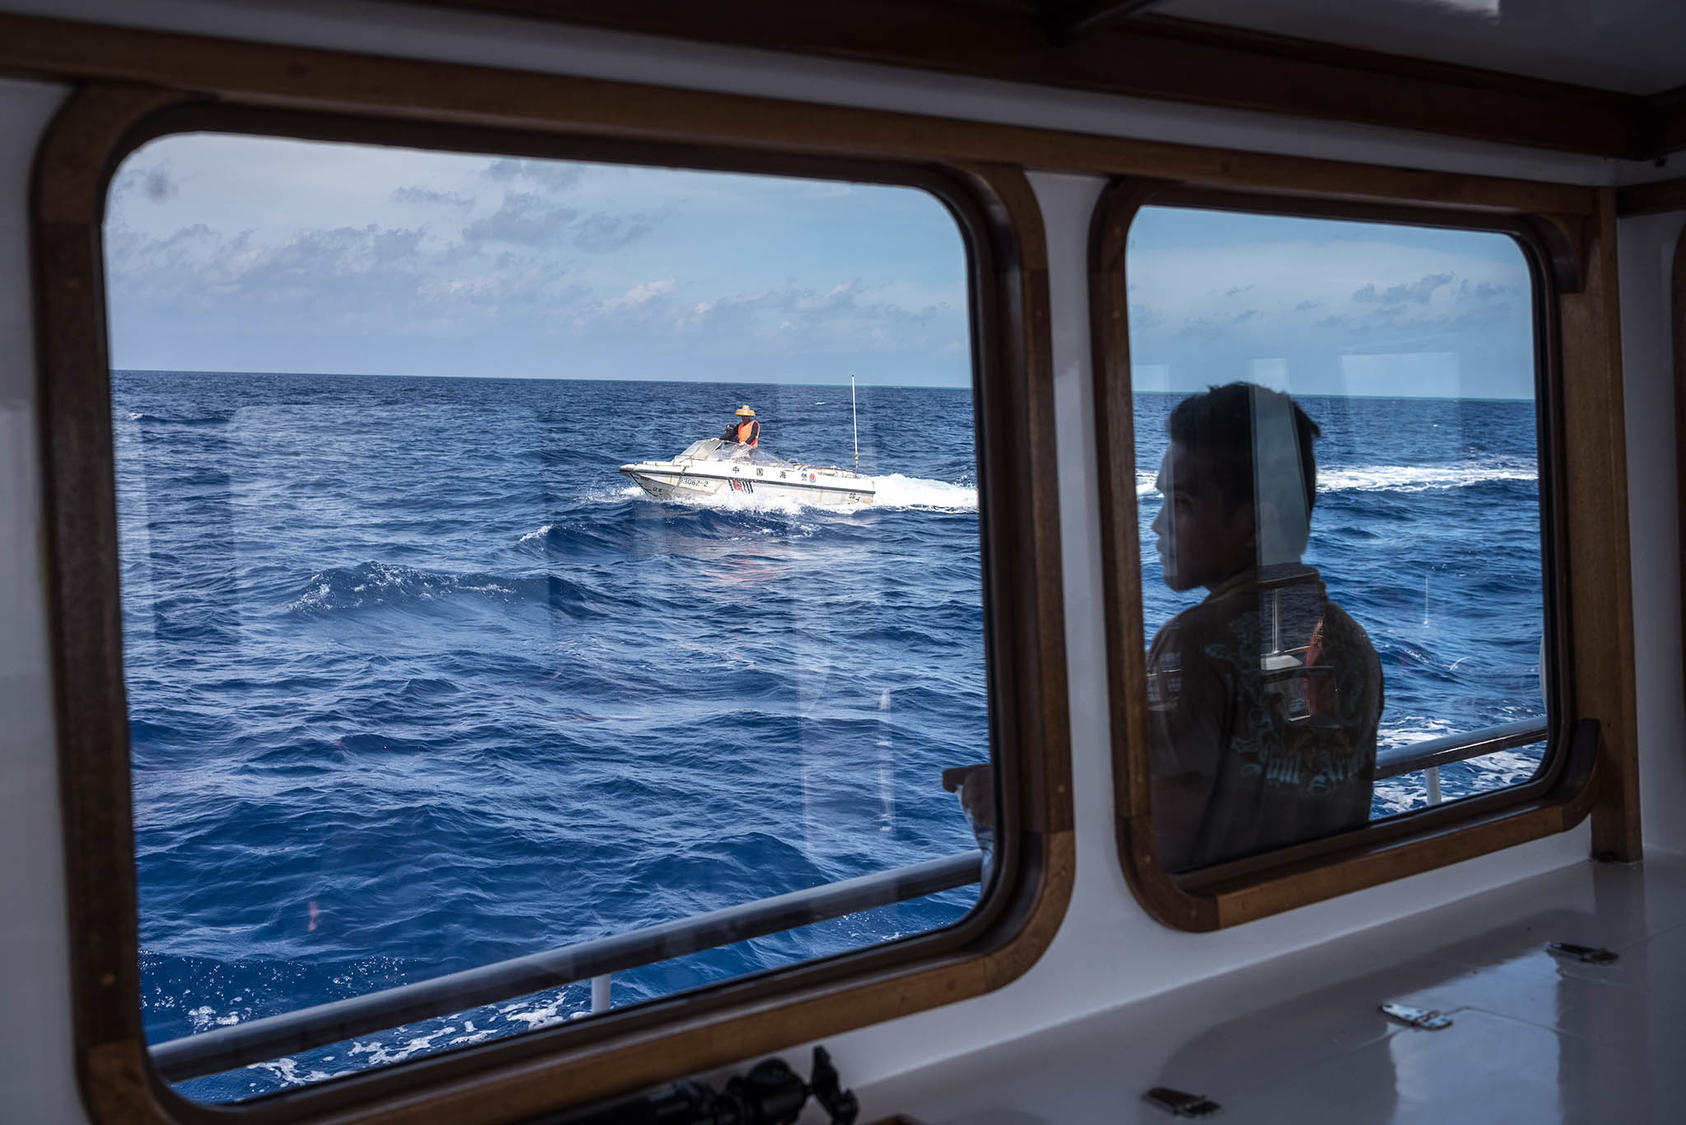 A speedboat launched from a Chinese Coast Guard vessel is seen through a window of the Motoryacht Isla, based in the Philippines, demanding it leave the Scarborough Shoal in the South China Sea, June 18, 2016. (Sergey Ponomarev/The New York Times)